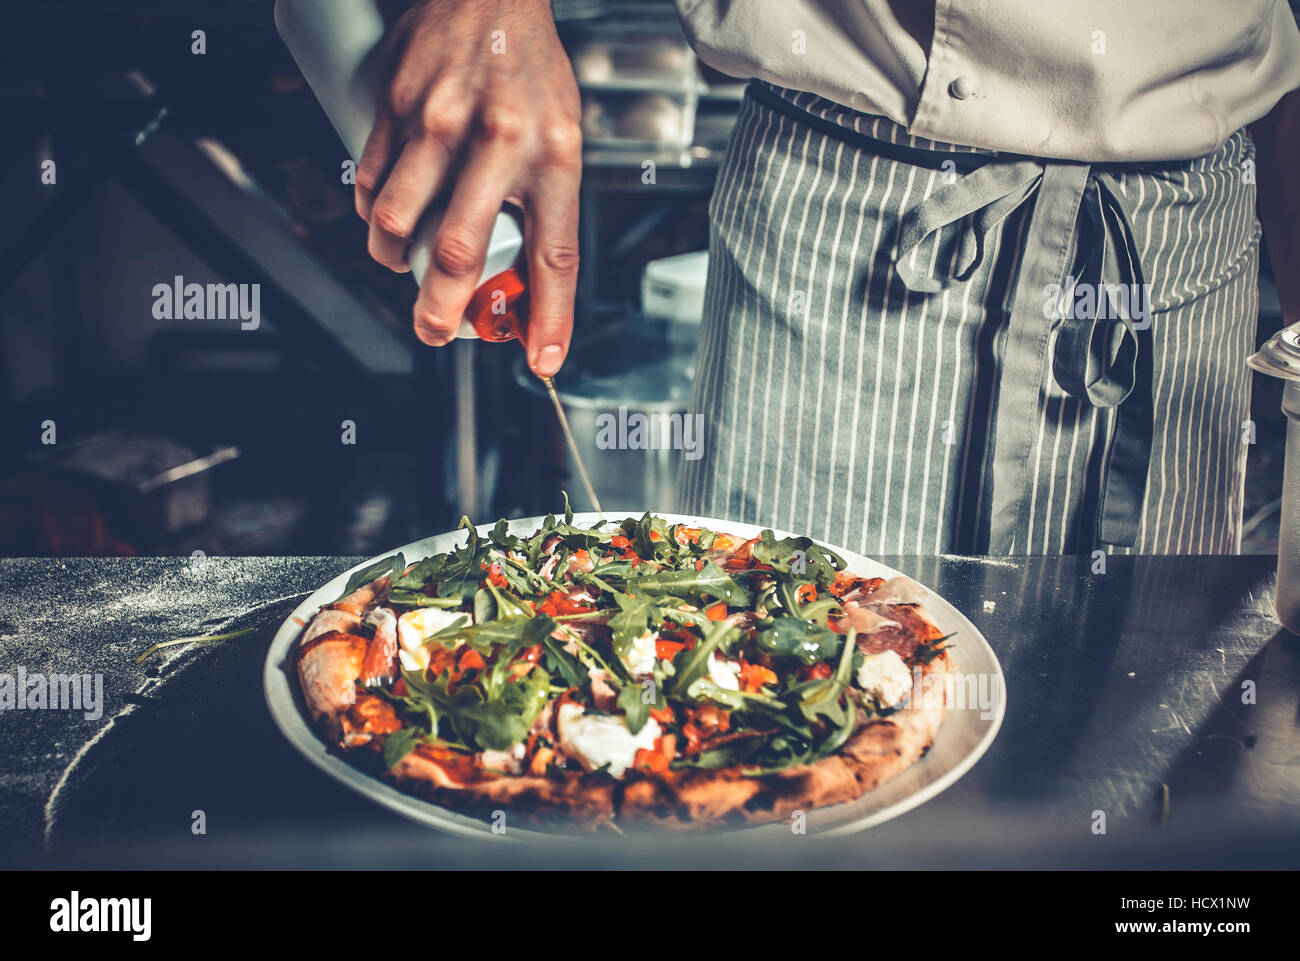 Chef cooking gourmet pizza Stock Photo